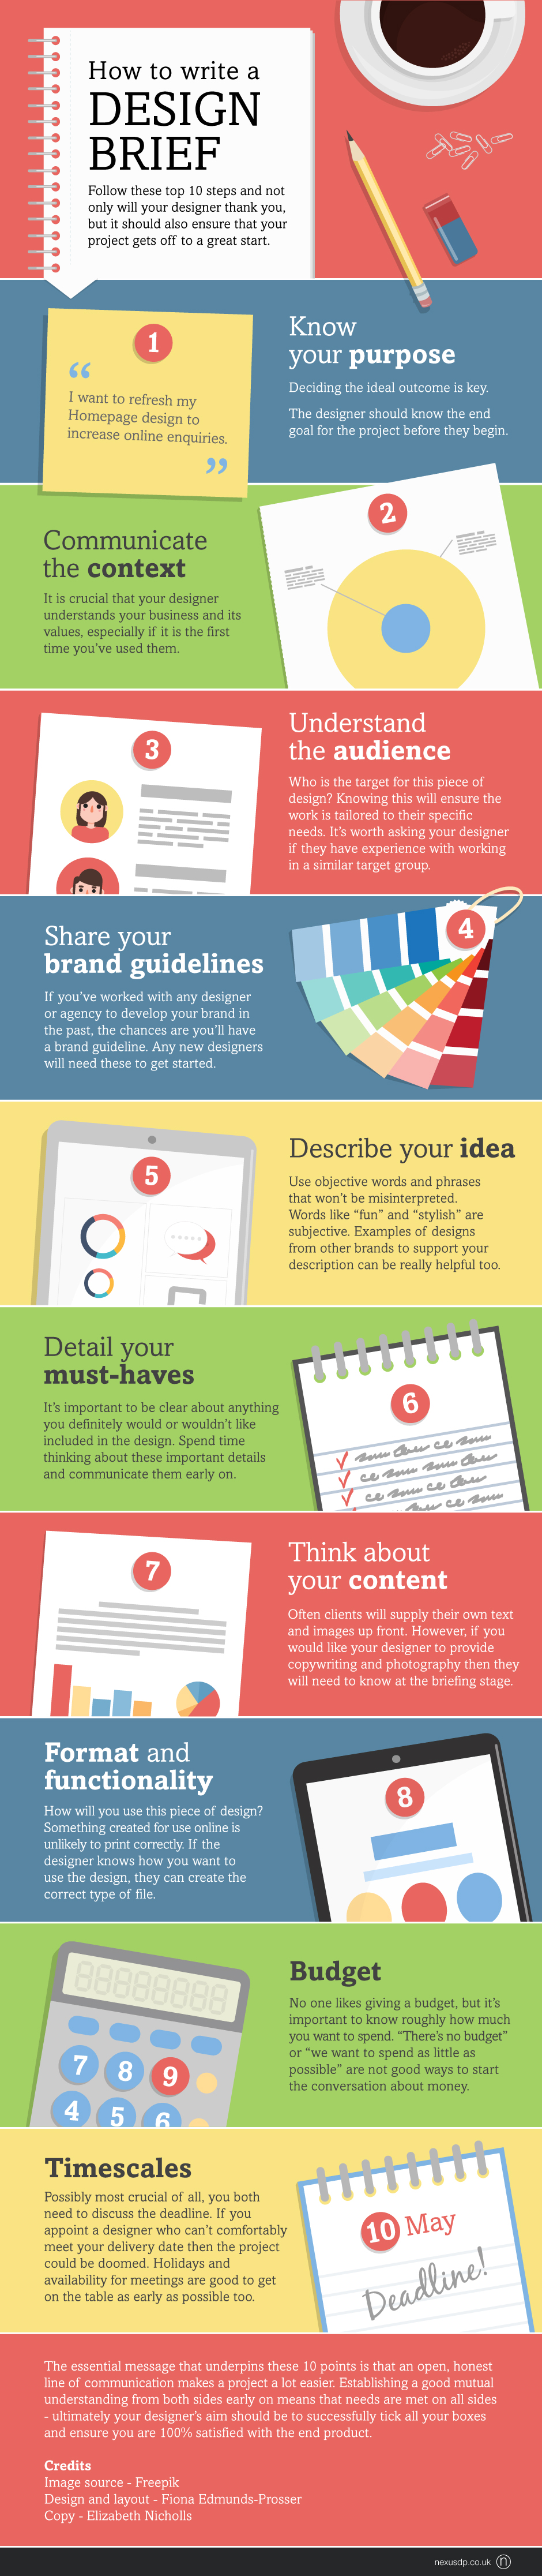 Top 10 Tips for Writing the Perfect Design Brief 